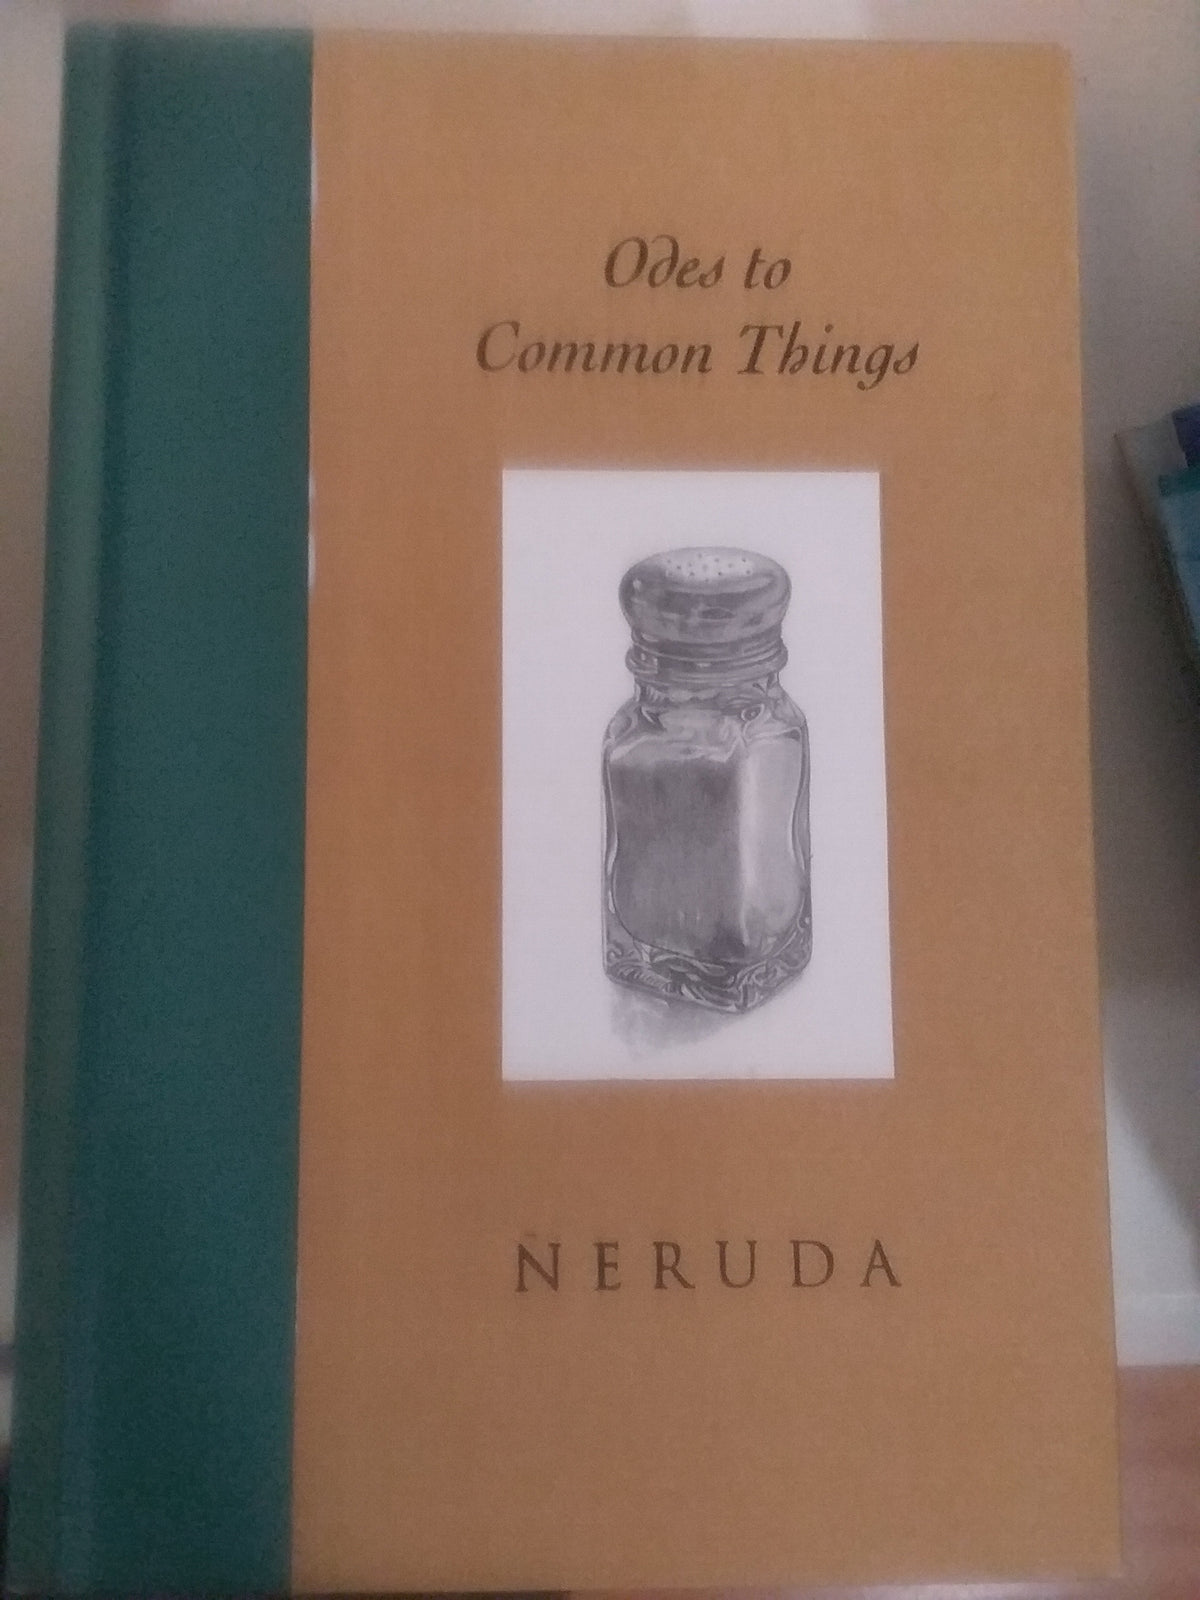 Odes to Common Things Pablo neruda